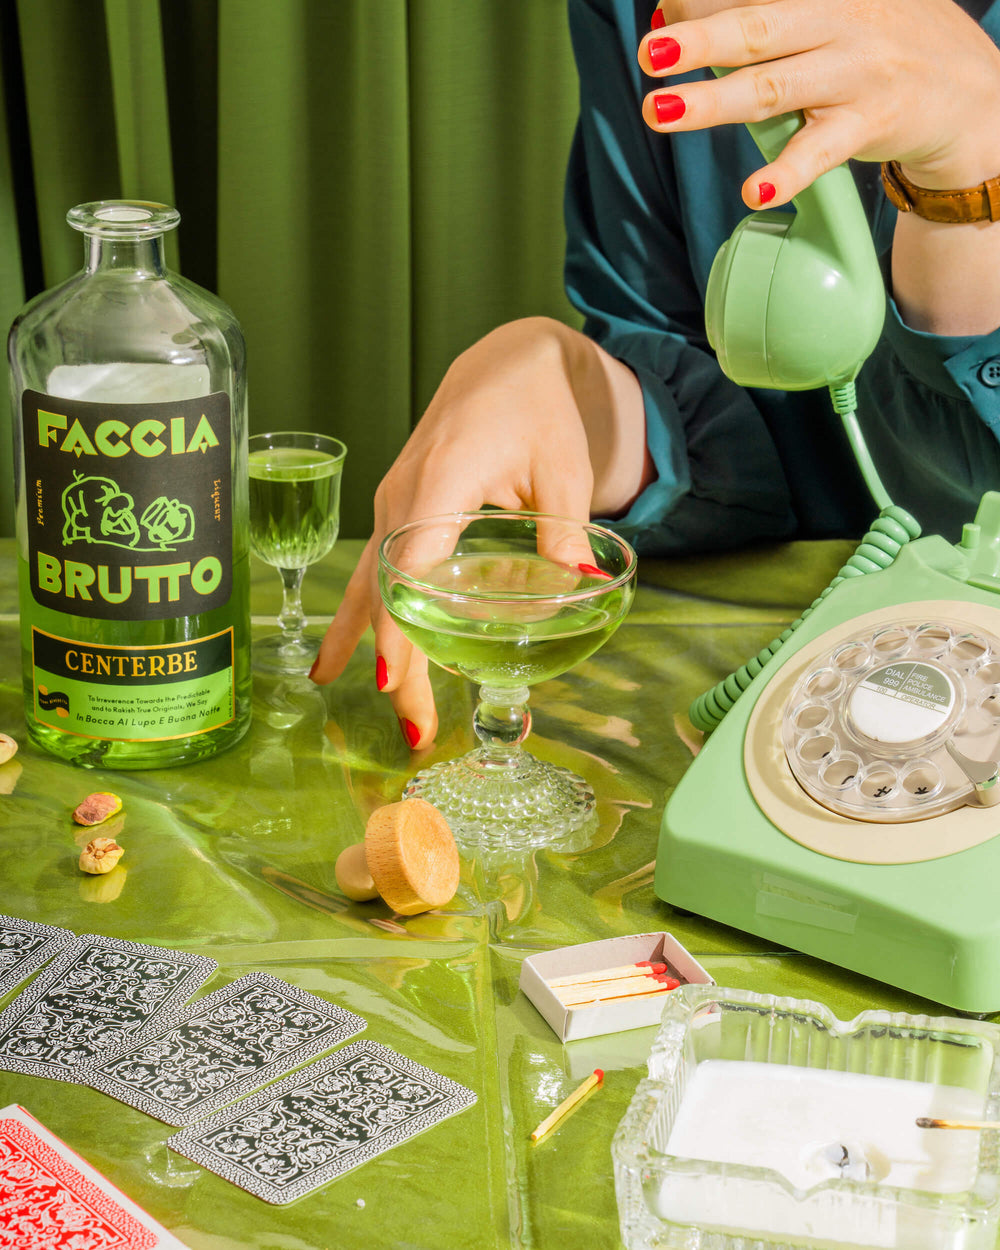 Tablescape with playing cards, matches, ashtray, green rotary phone, hands with red painted nails, cocktail glasses and a bottle of Faccia Brutto Centerbe